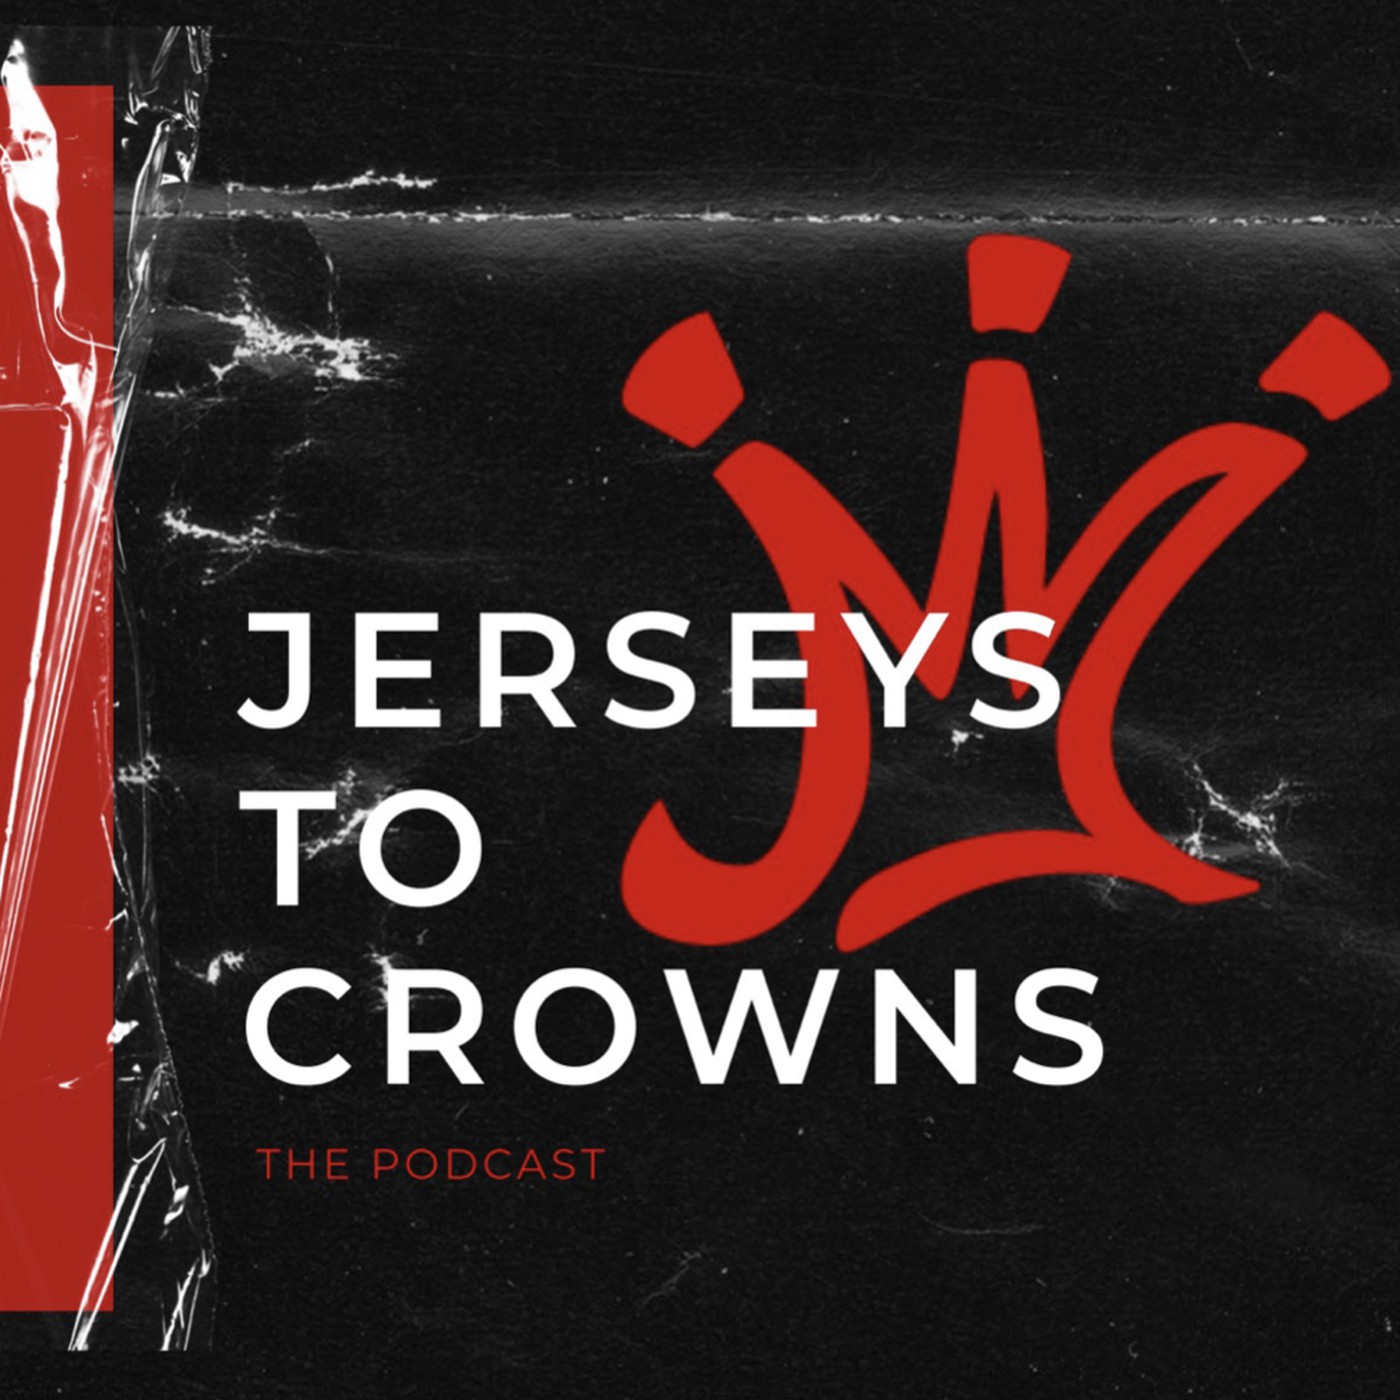 Jerseys to Crowns